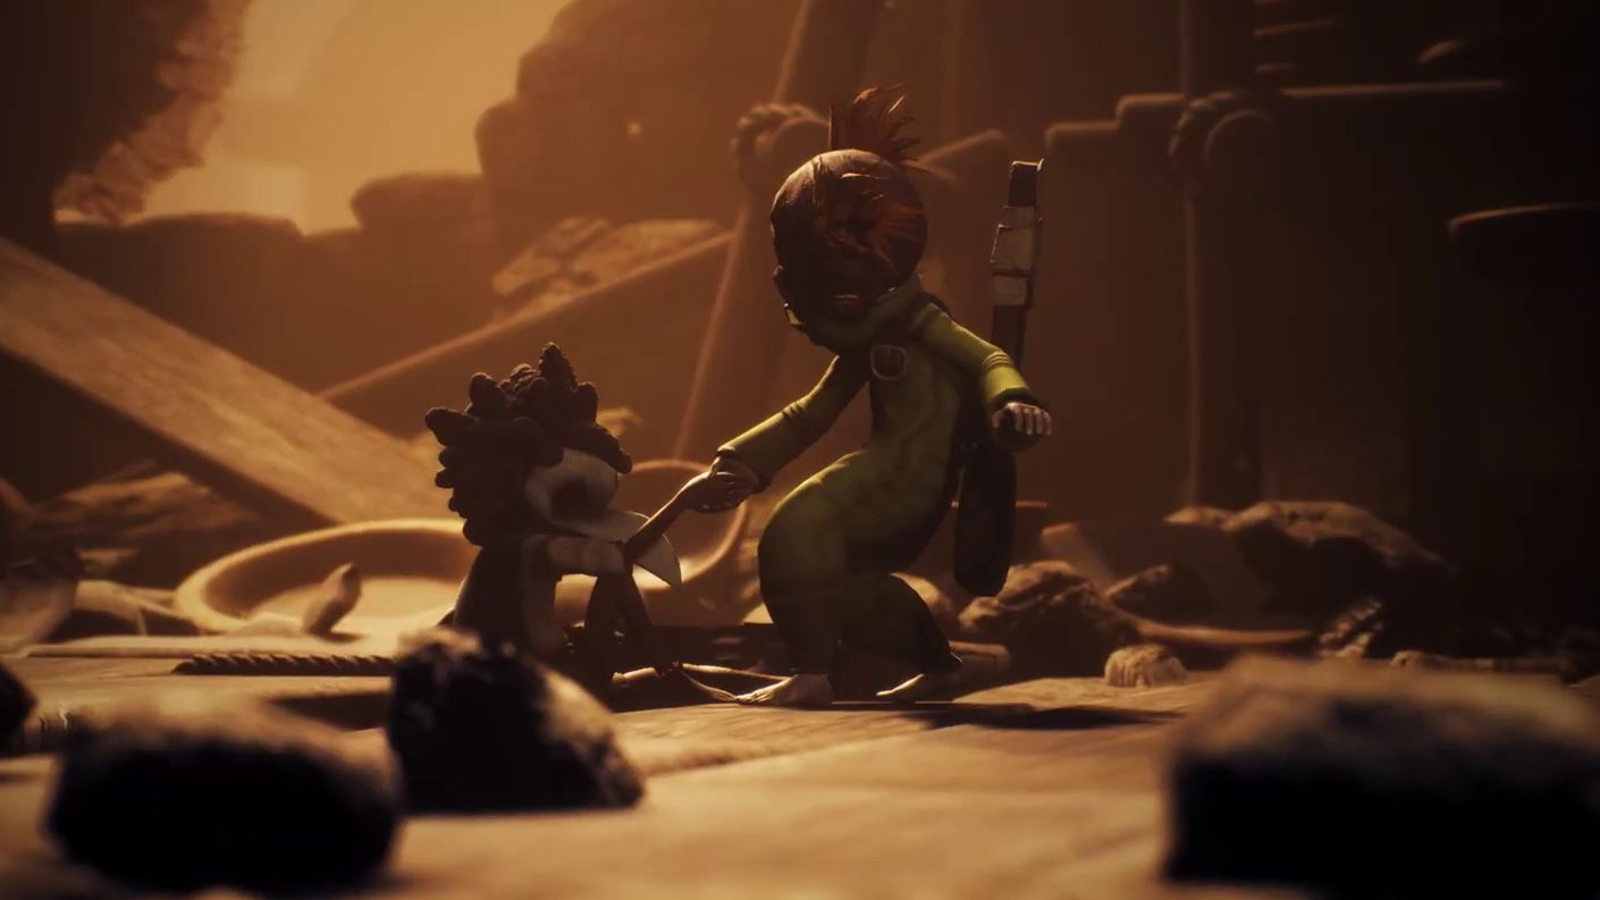 Little Nightmares 3 Announced with a Twist: Campaign Co-Op - Level Push